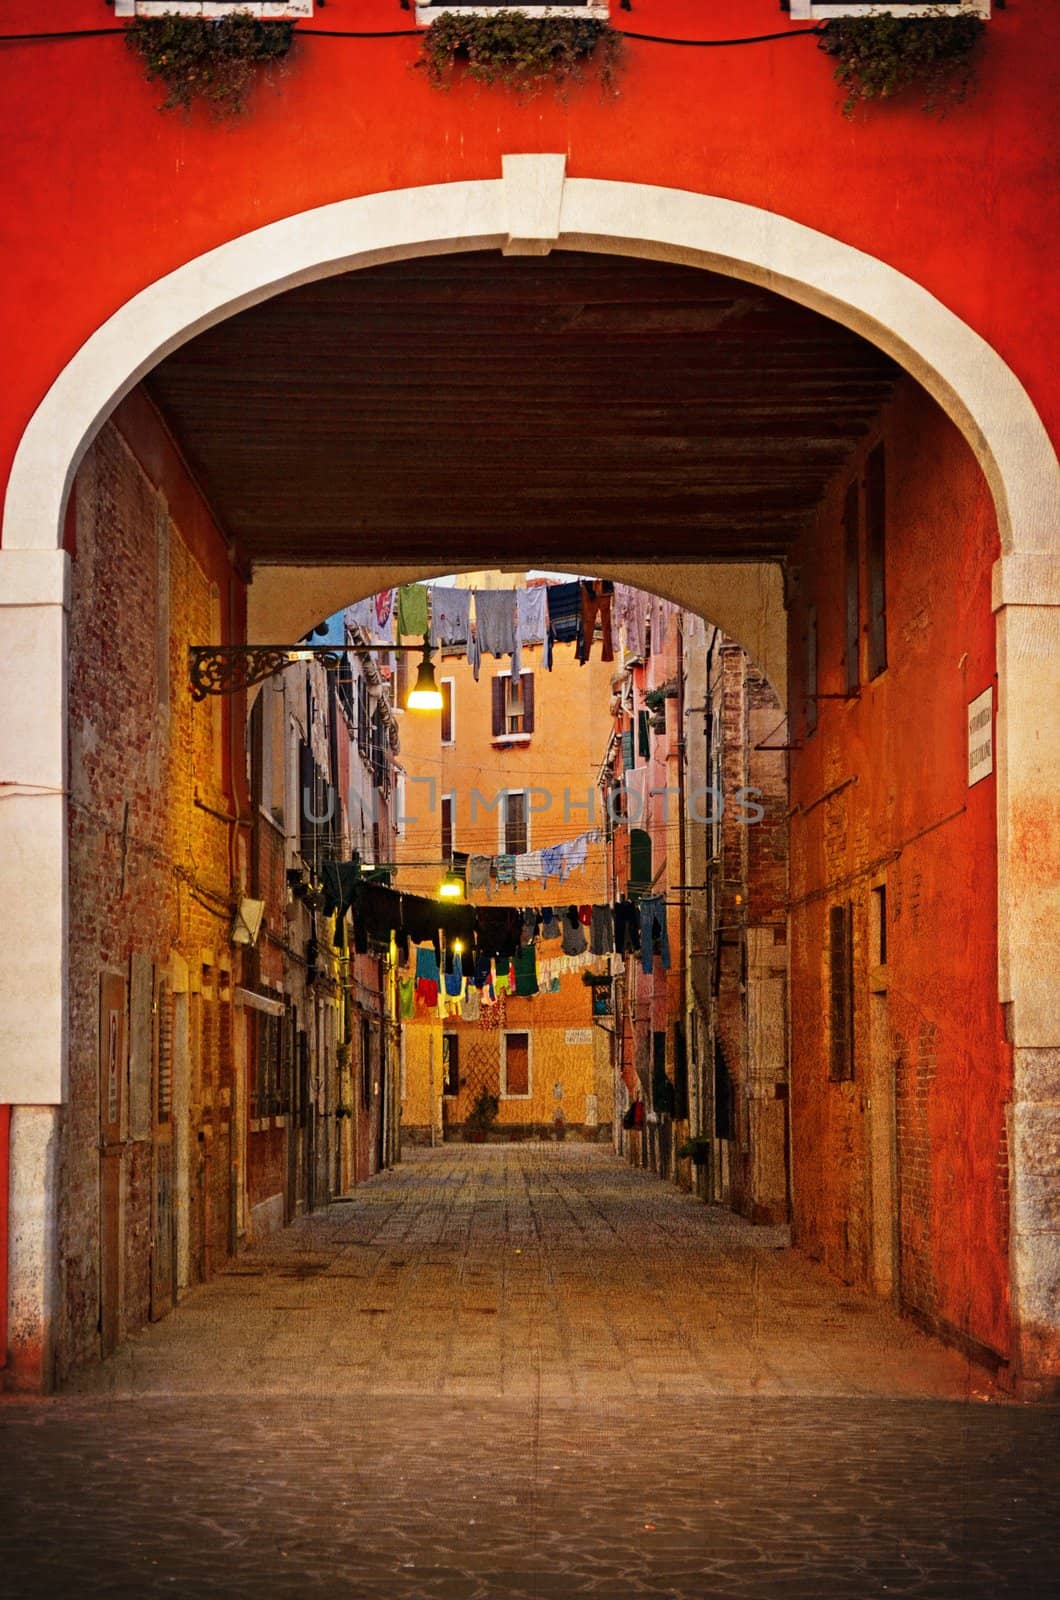 Old Venetian yard, Italy.Photo in old color image style.